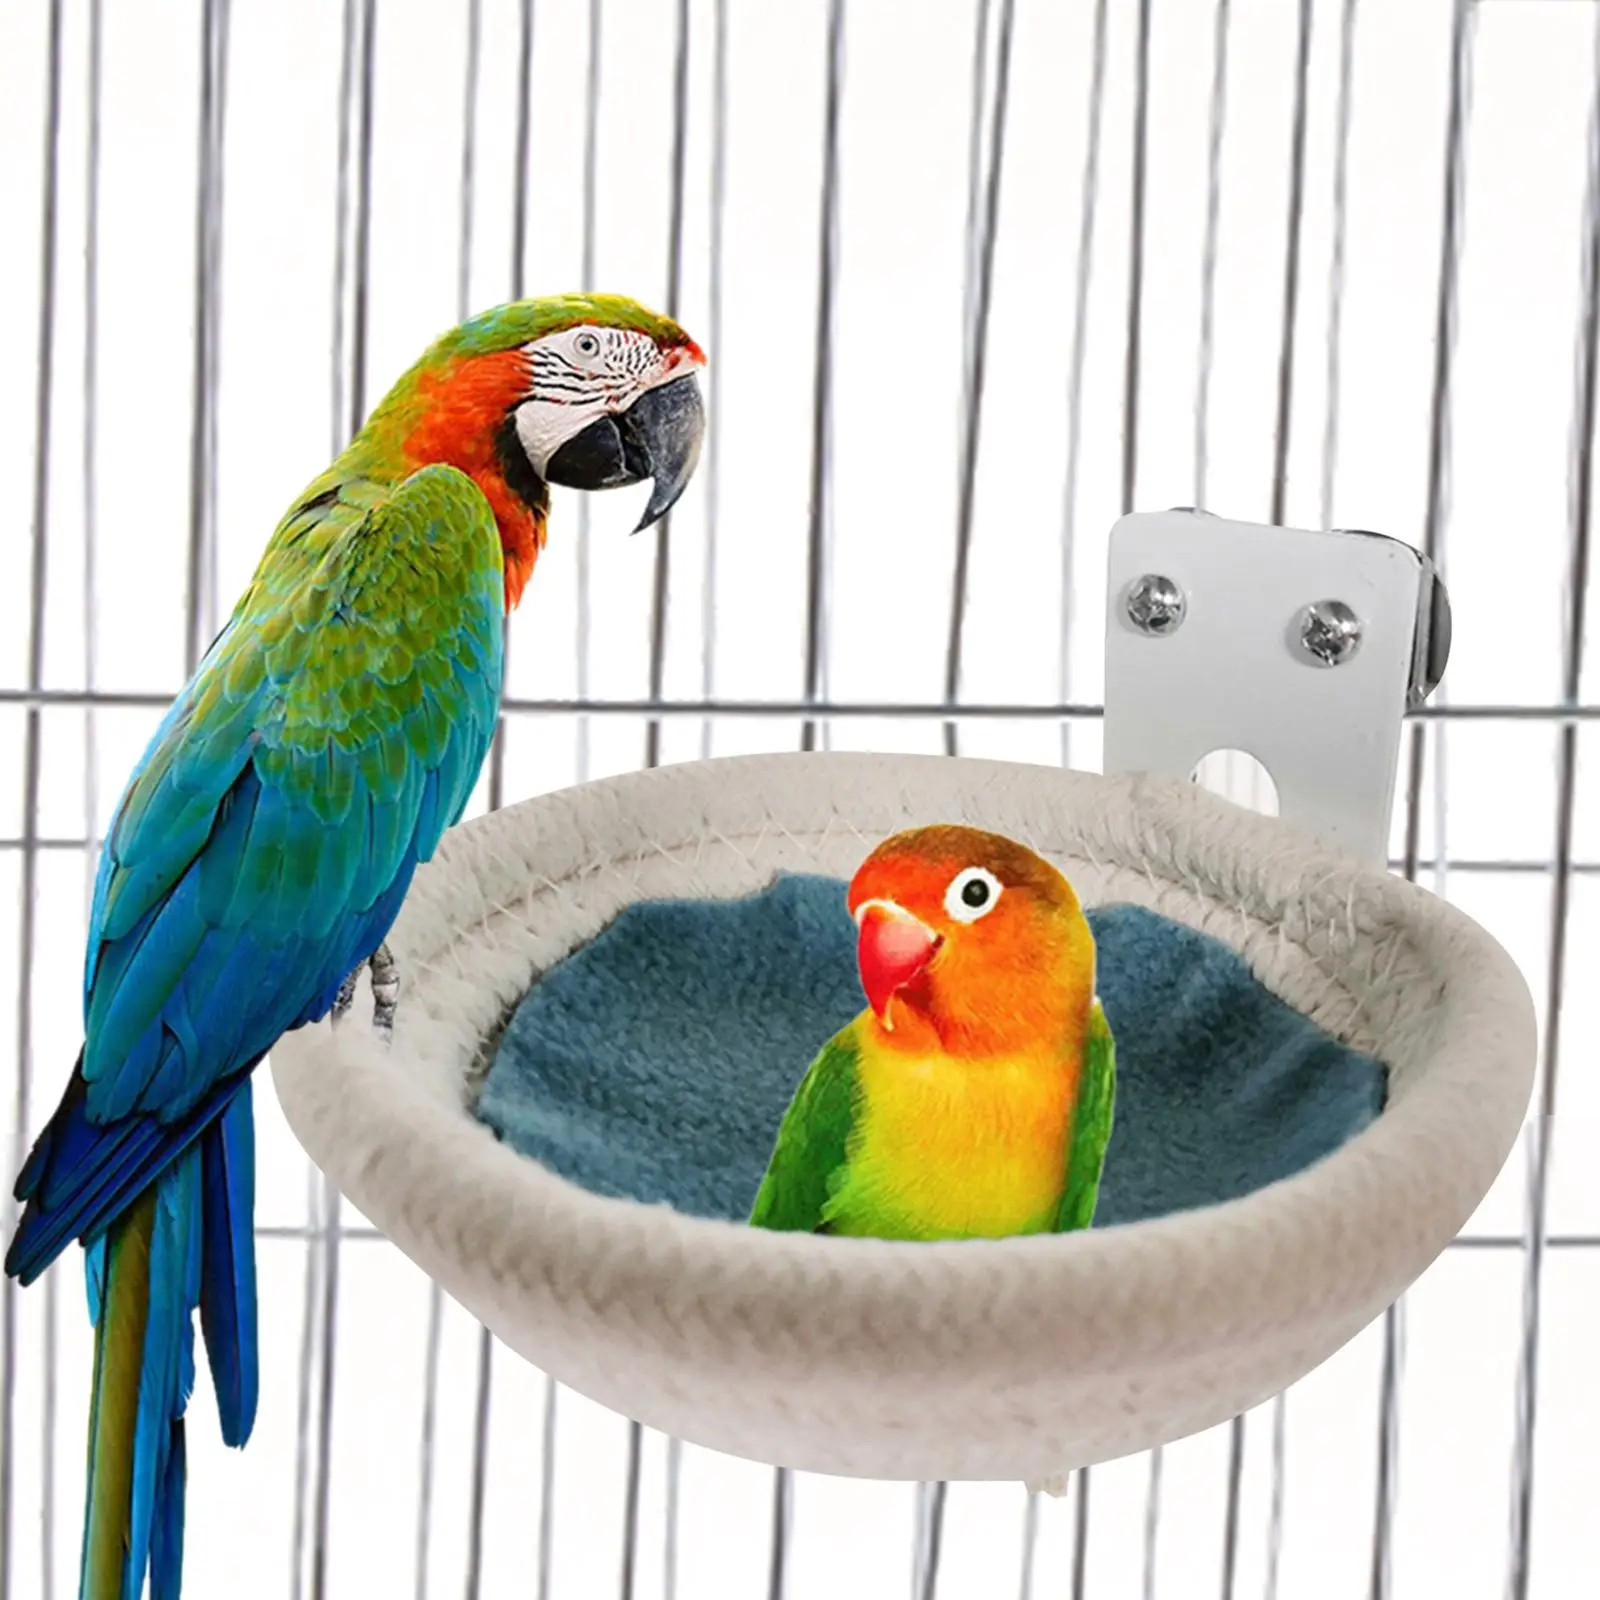 Parrot Nest Bed Birds Breeding Nest Bed Winter Warm Bird Breeding Hut Handmade Bird Nest Bird Cage Nest for Canaries Parakeets